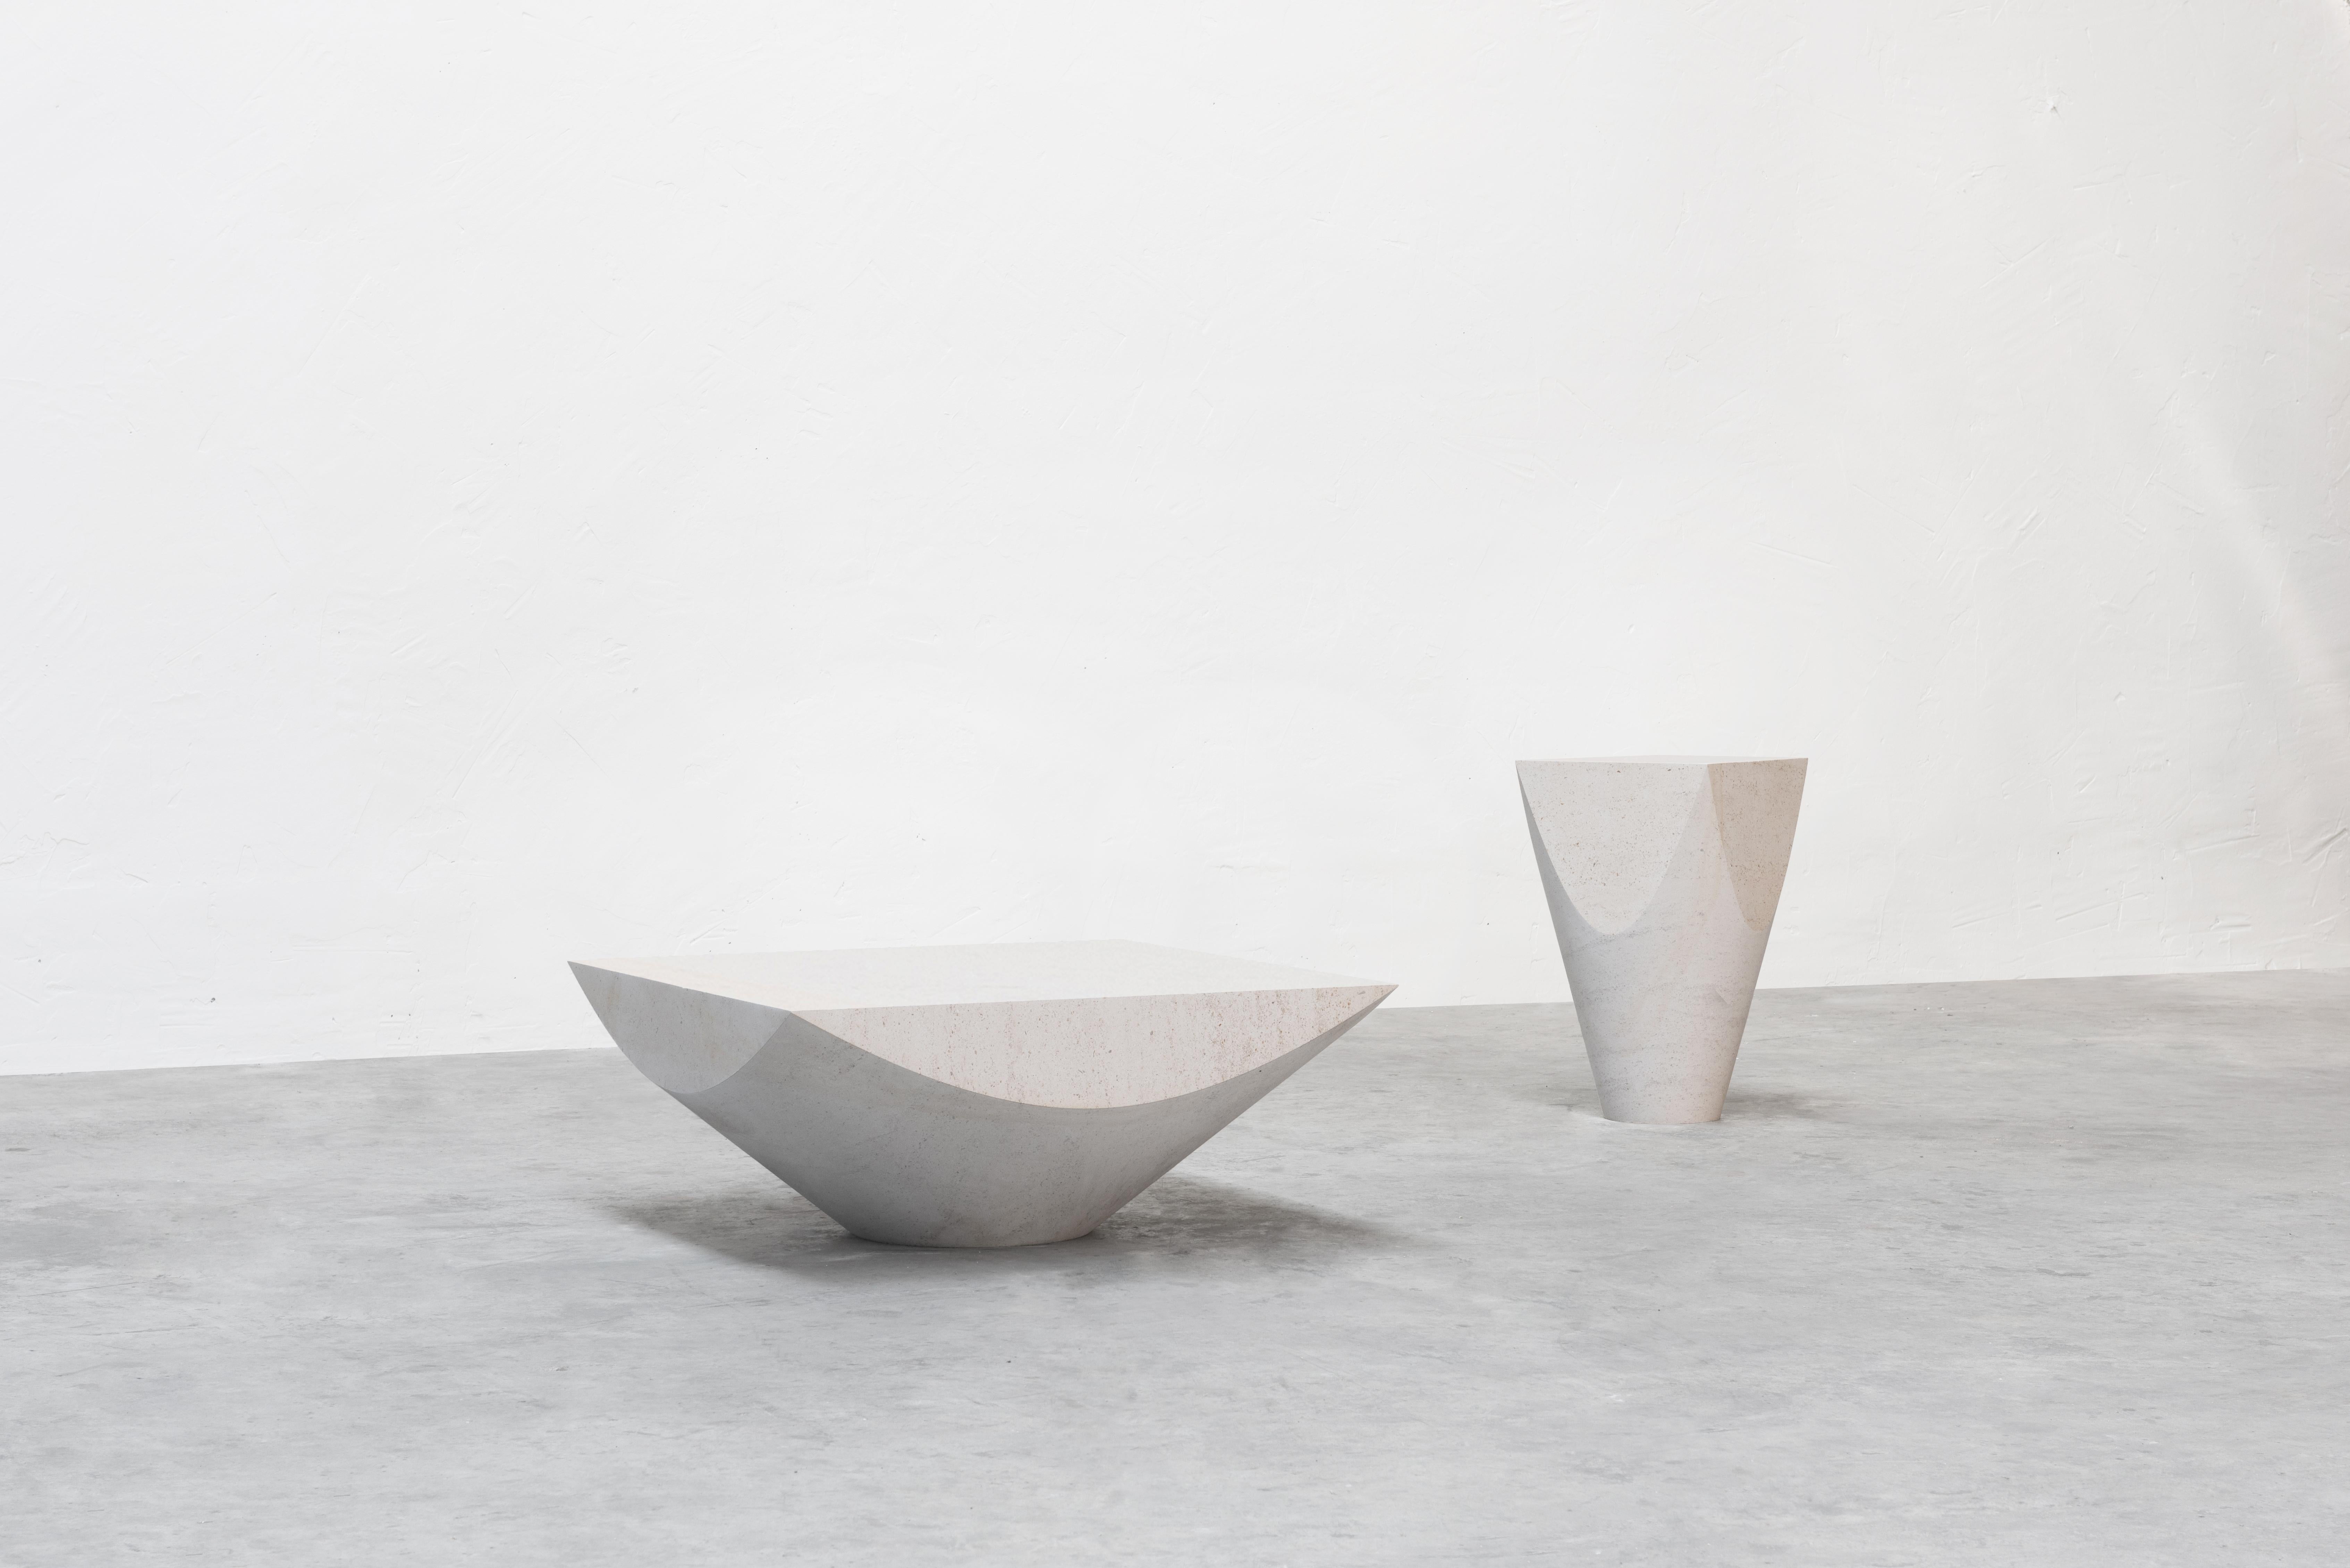 ARCH
Low Table designed by Frédéric Saulou

Limited edition of 12
Buffon marble limestone

H. 30 x 80 x 80 cm

-----
French Designer Frédéric Saulou, born in 1989, come from in Applied Arts formations and French academy of Fine Arts to